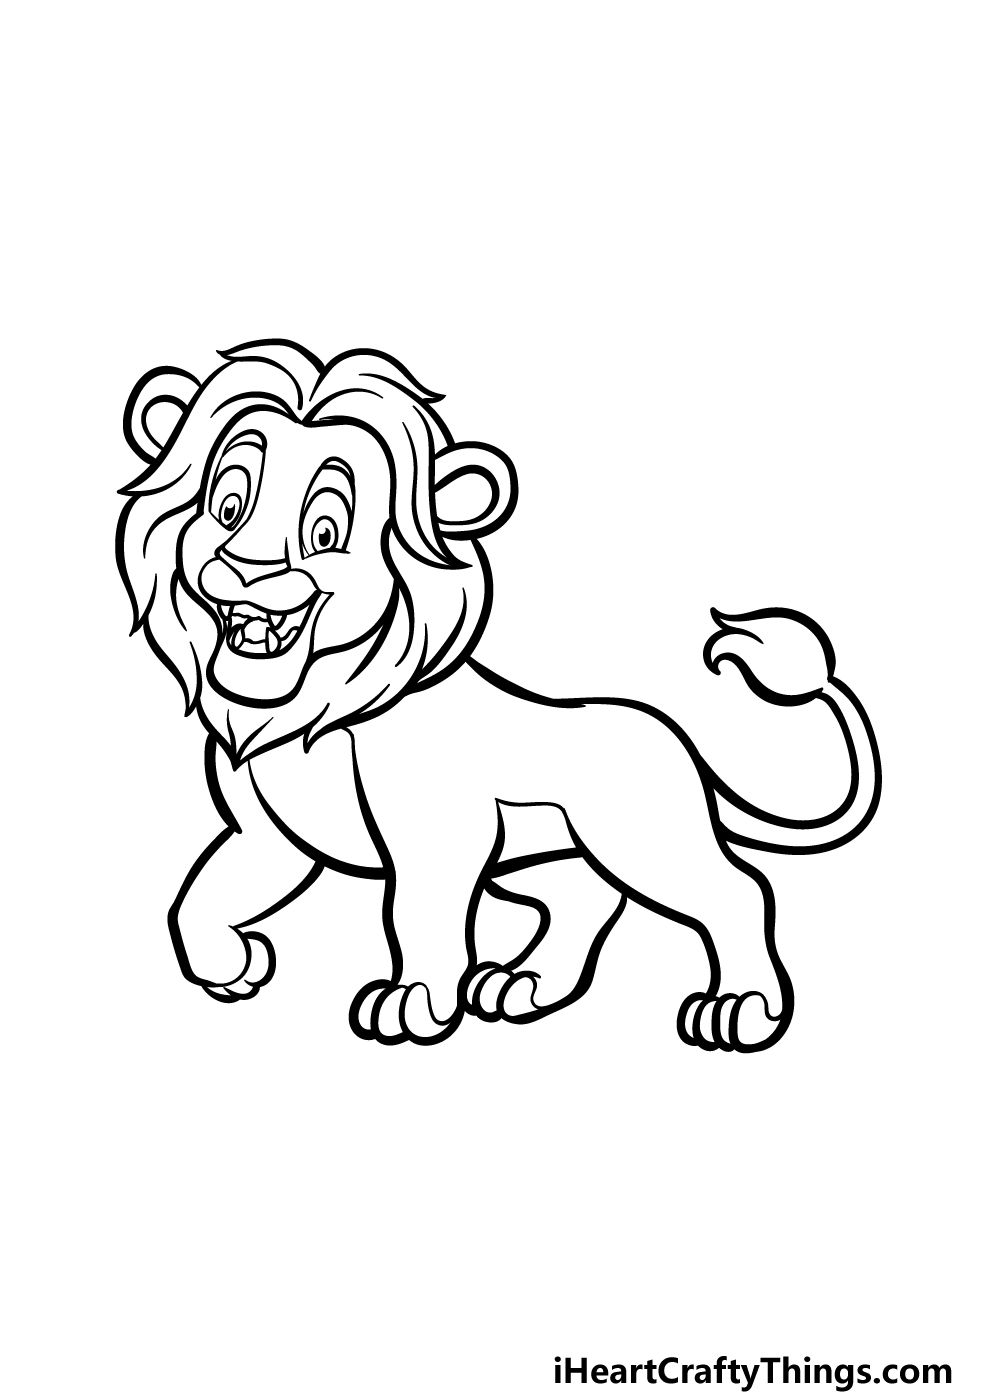 Free: cute lion cartoon coloring page for kids - nohat.cc-saigonsouth.com.vn